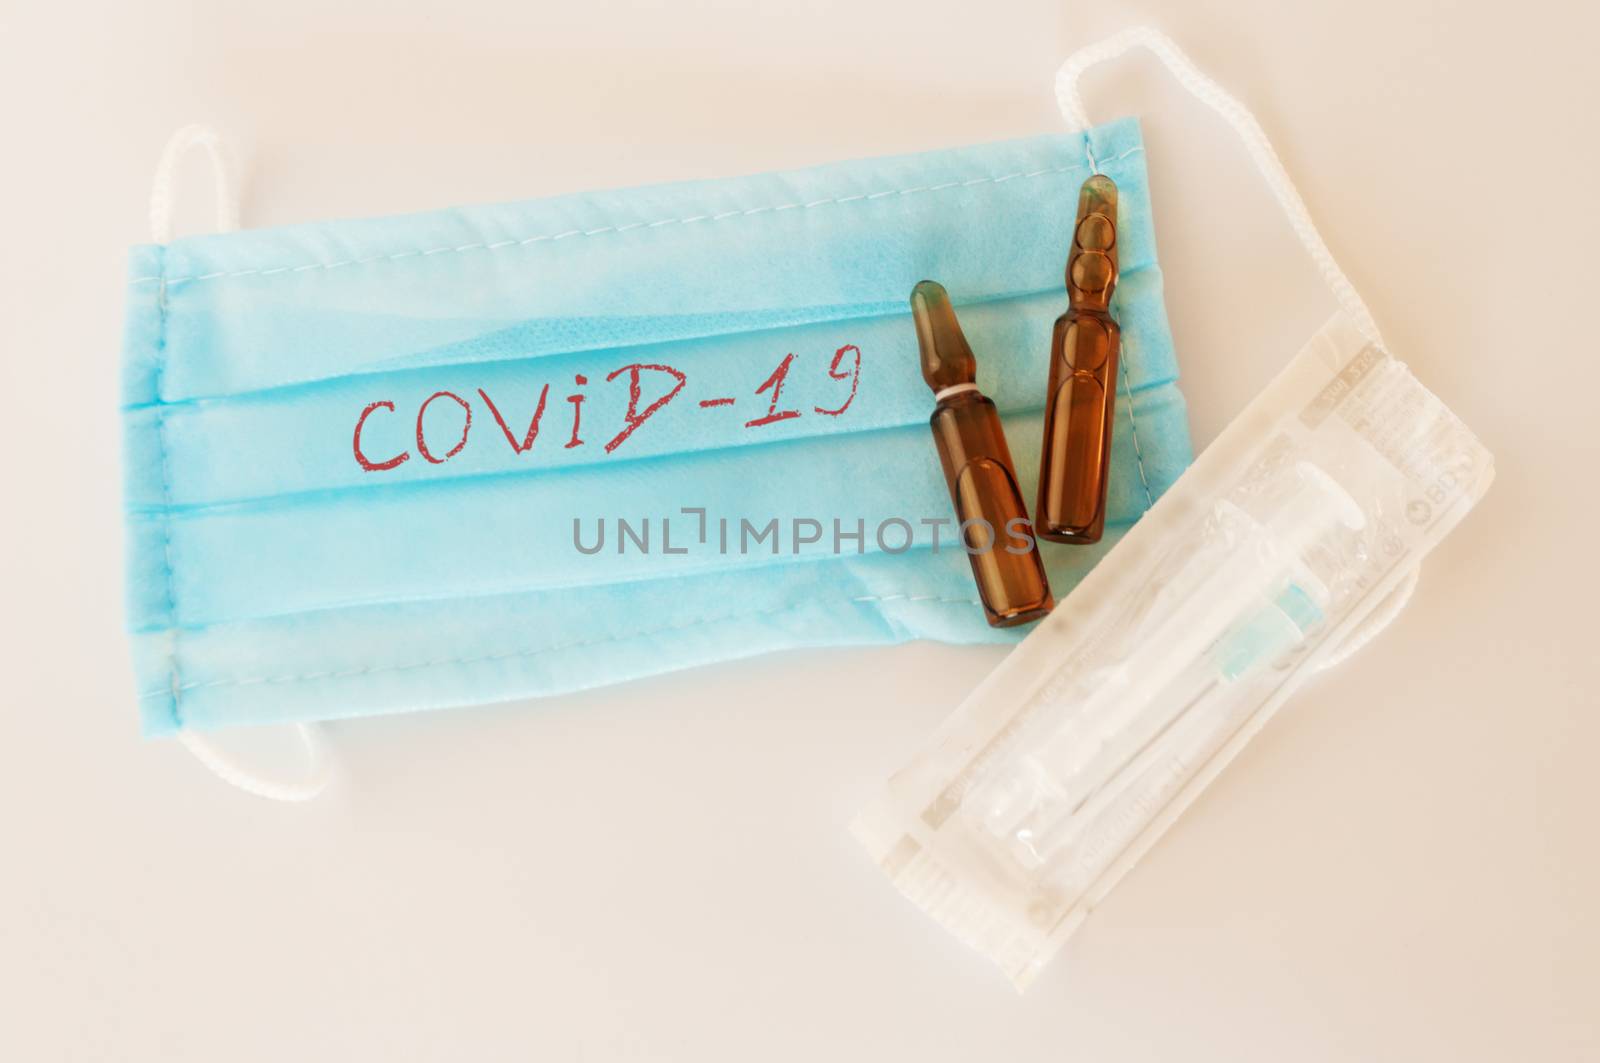 protective medical mask with the inscription covid-19, antibiotics in ampoules and a syringe. The concept of the treatment of the coronavirus pandemic. Top view. Copy space.